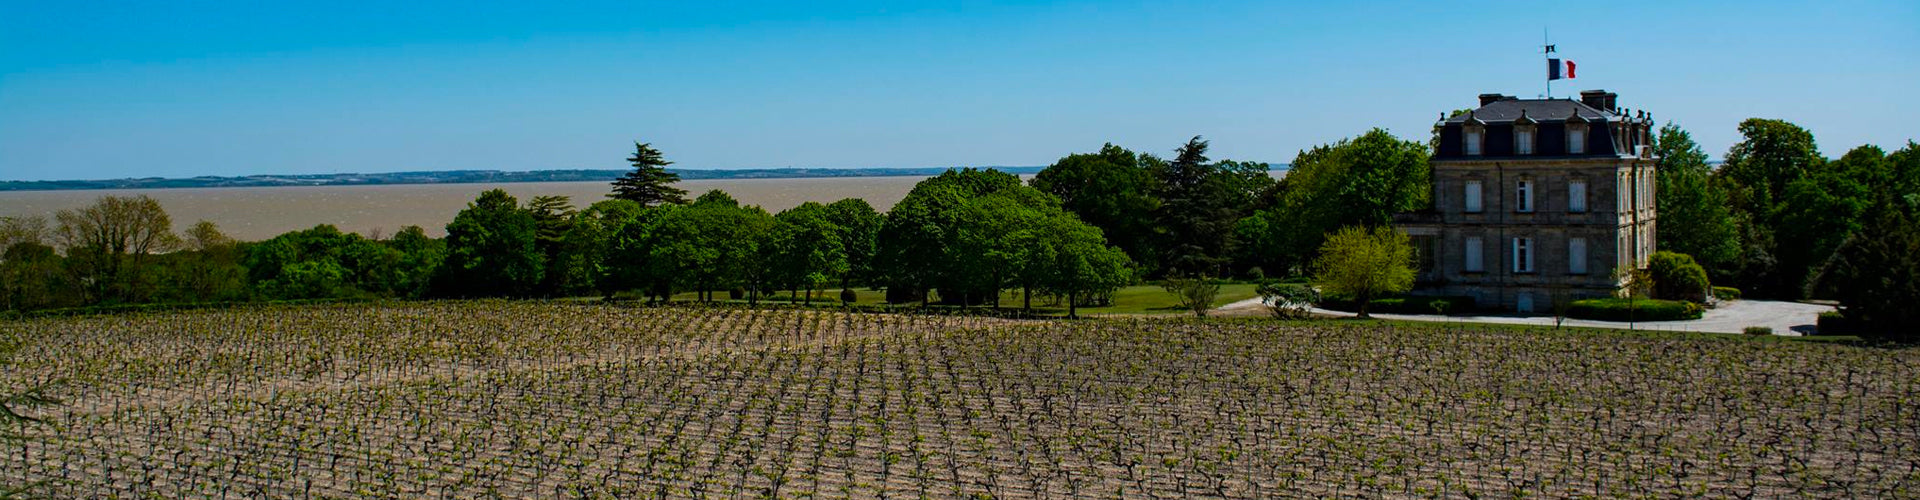 The Château La Tour de By and vineyards close to the Gironde in Bordeaux